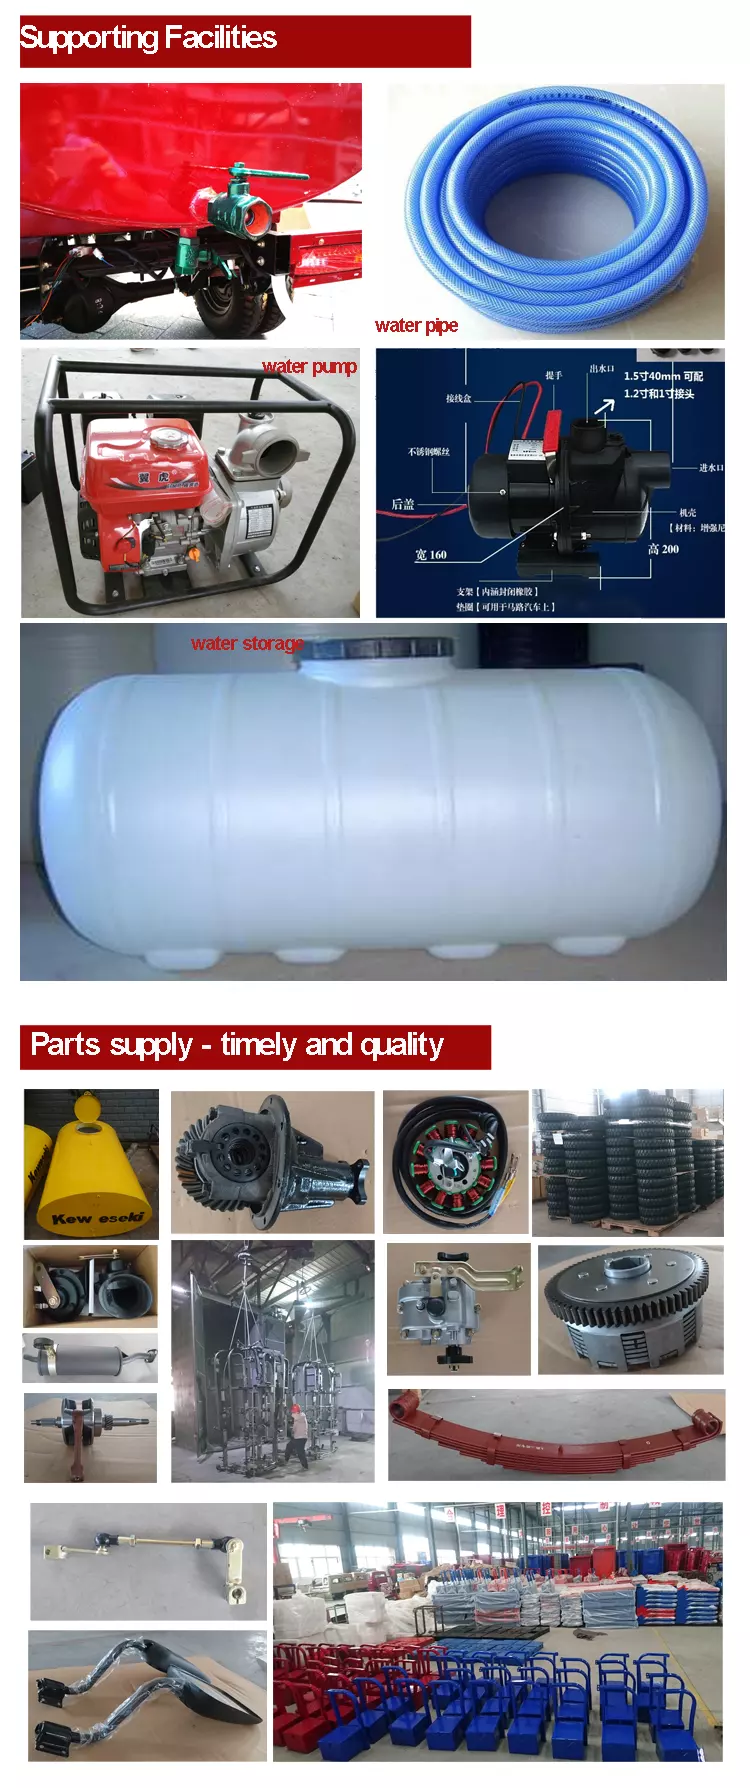 Luxurious large capacity 3 big wheels rain water tanks on wheel storage water tank tricycle for carrying water